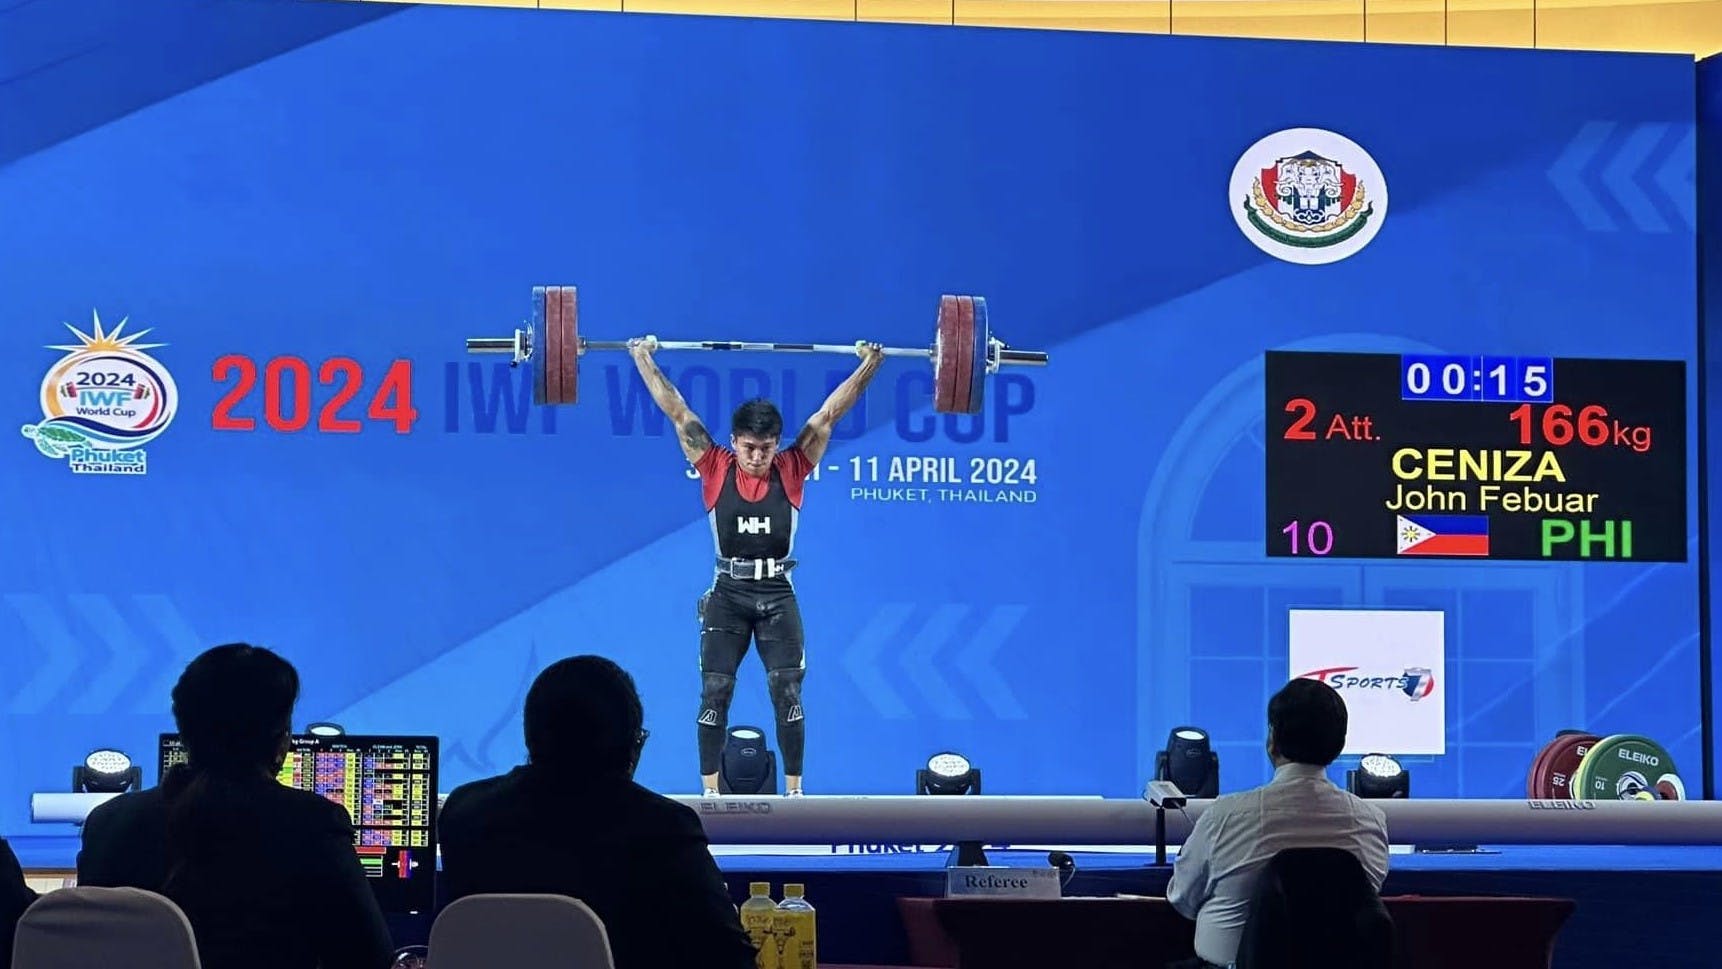 Unexpected 300kg: Weightlifter John Febuar Ceniza looks back on Olympic berth-clinching performance